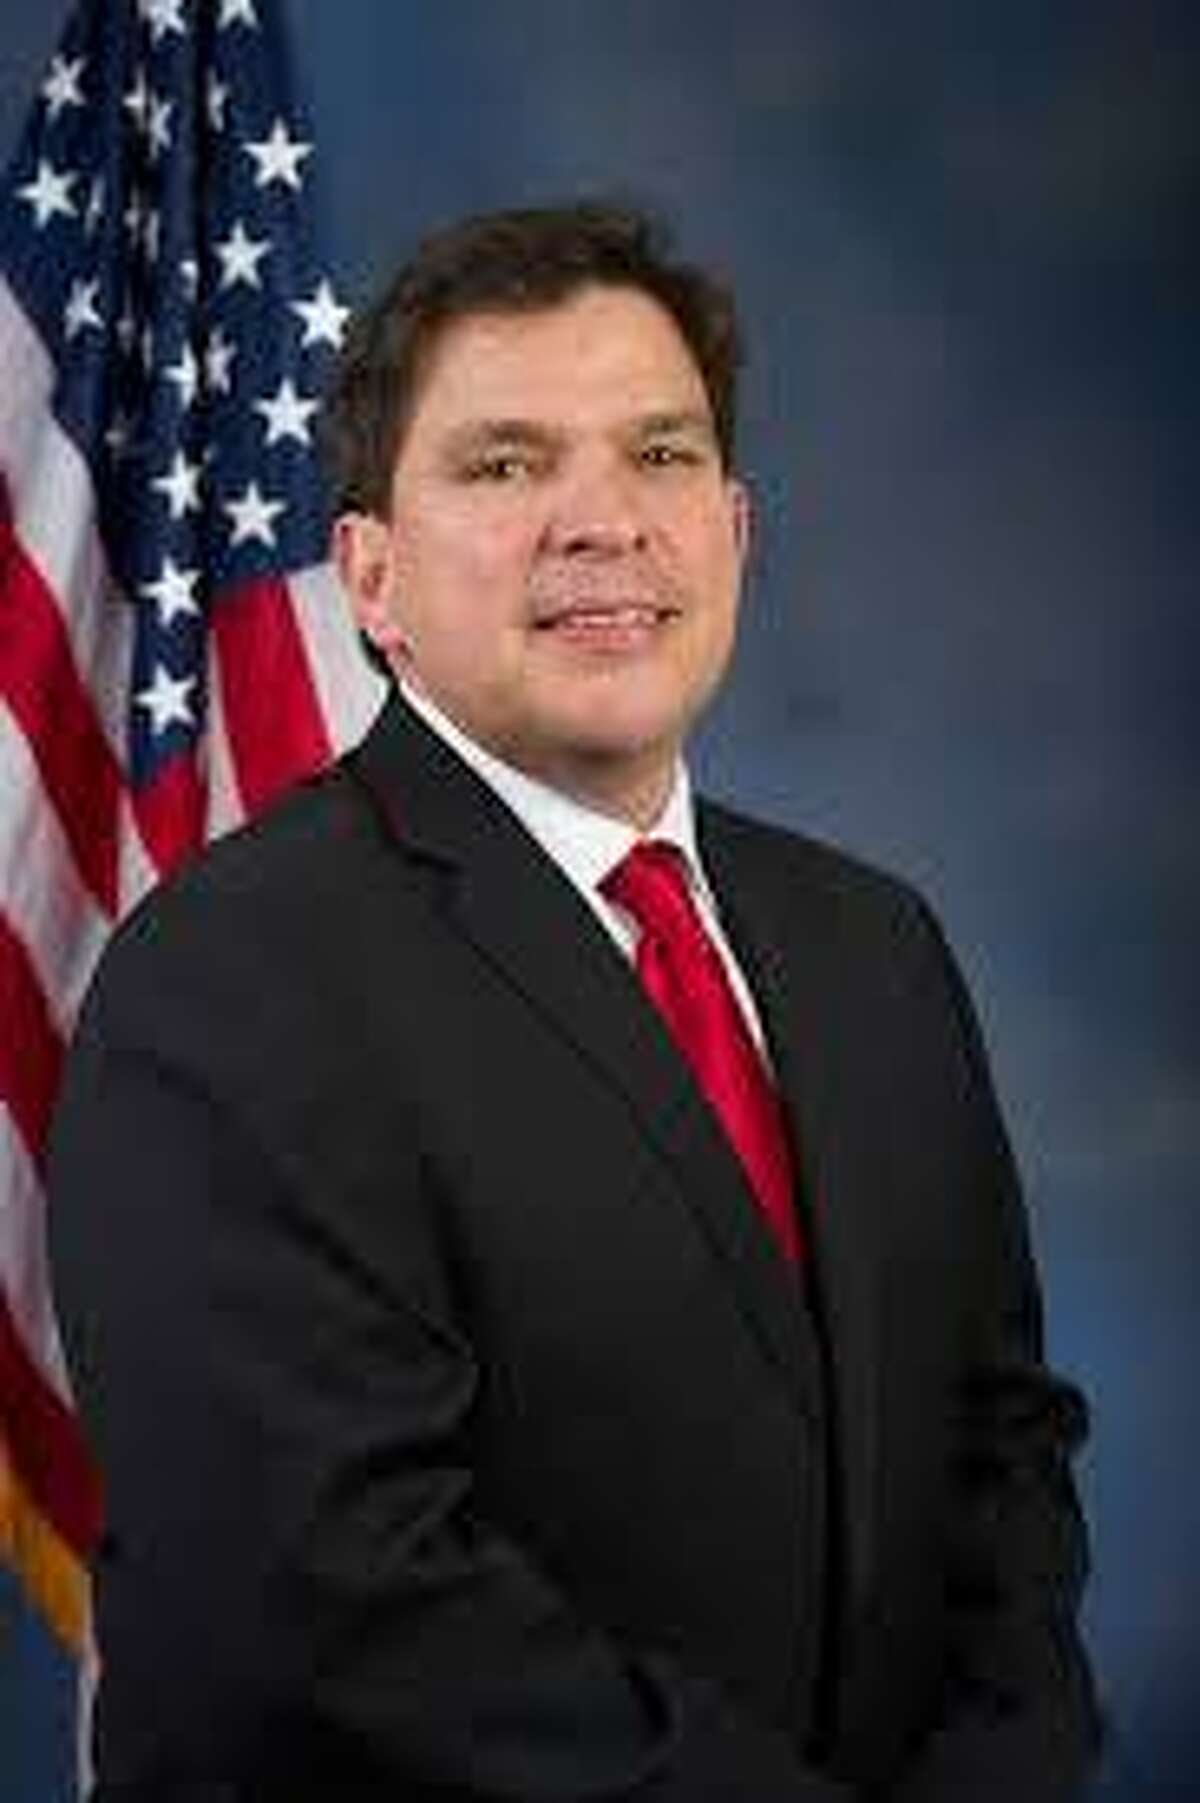 U.S. Rep. Vicente Gonzalez, D-McAllen, will not run for re-election in his district but in a neighboring district now represented by retiring U.S. Rep. Filemón Vela, where Gonzalez’s home was moved in the state’s newly drawn congressional maps.